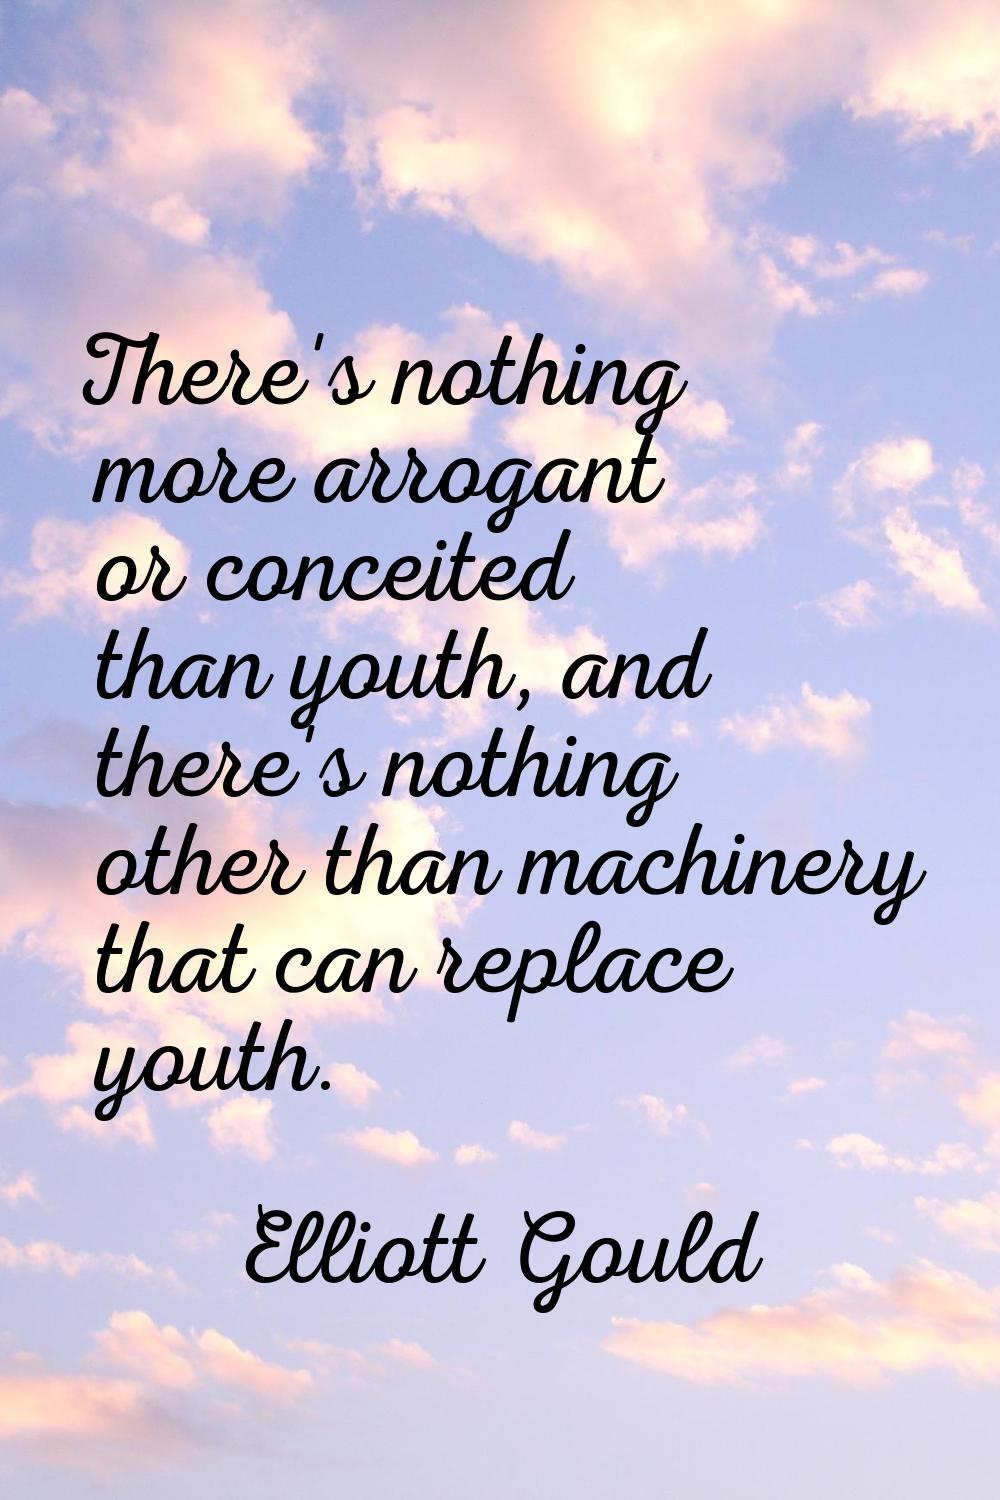 There's nothing more arrogant or conceited than youth, and there's nothing other than machinery tha